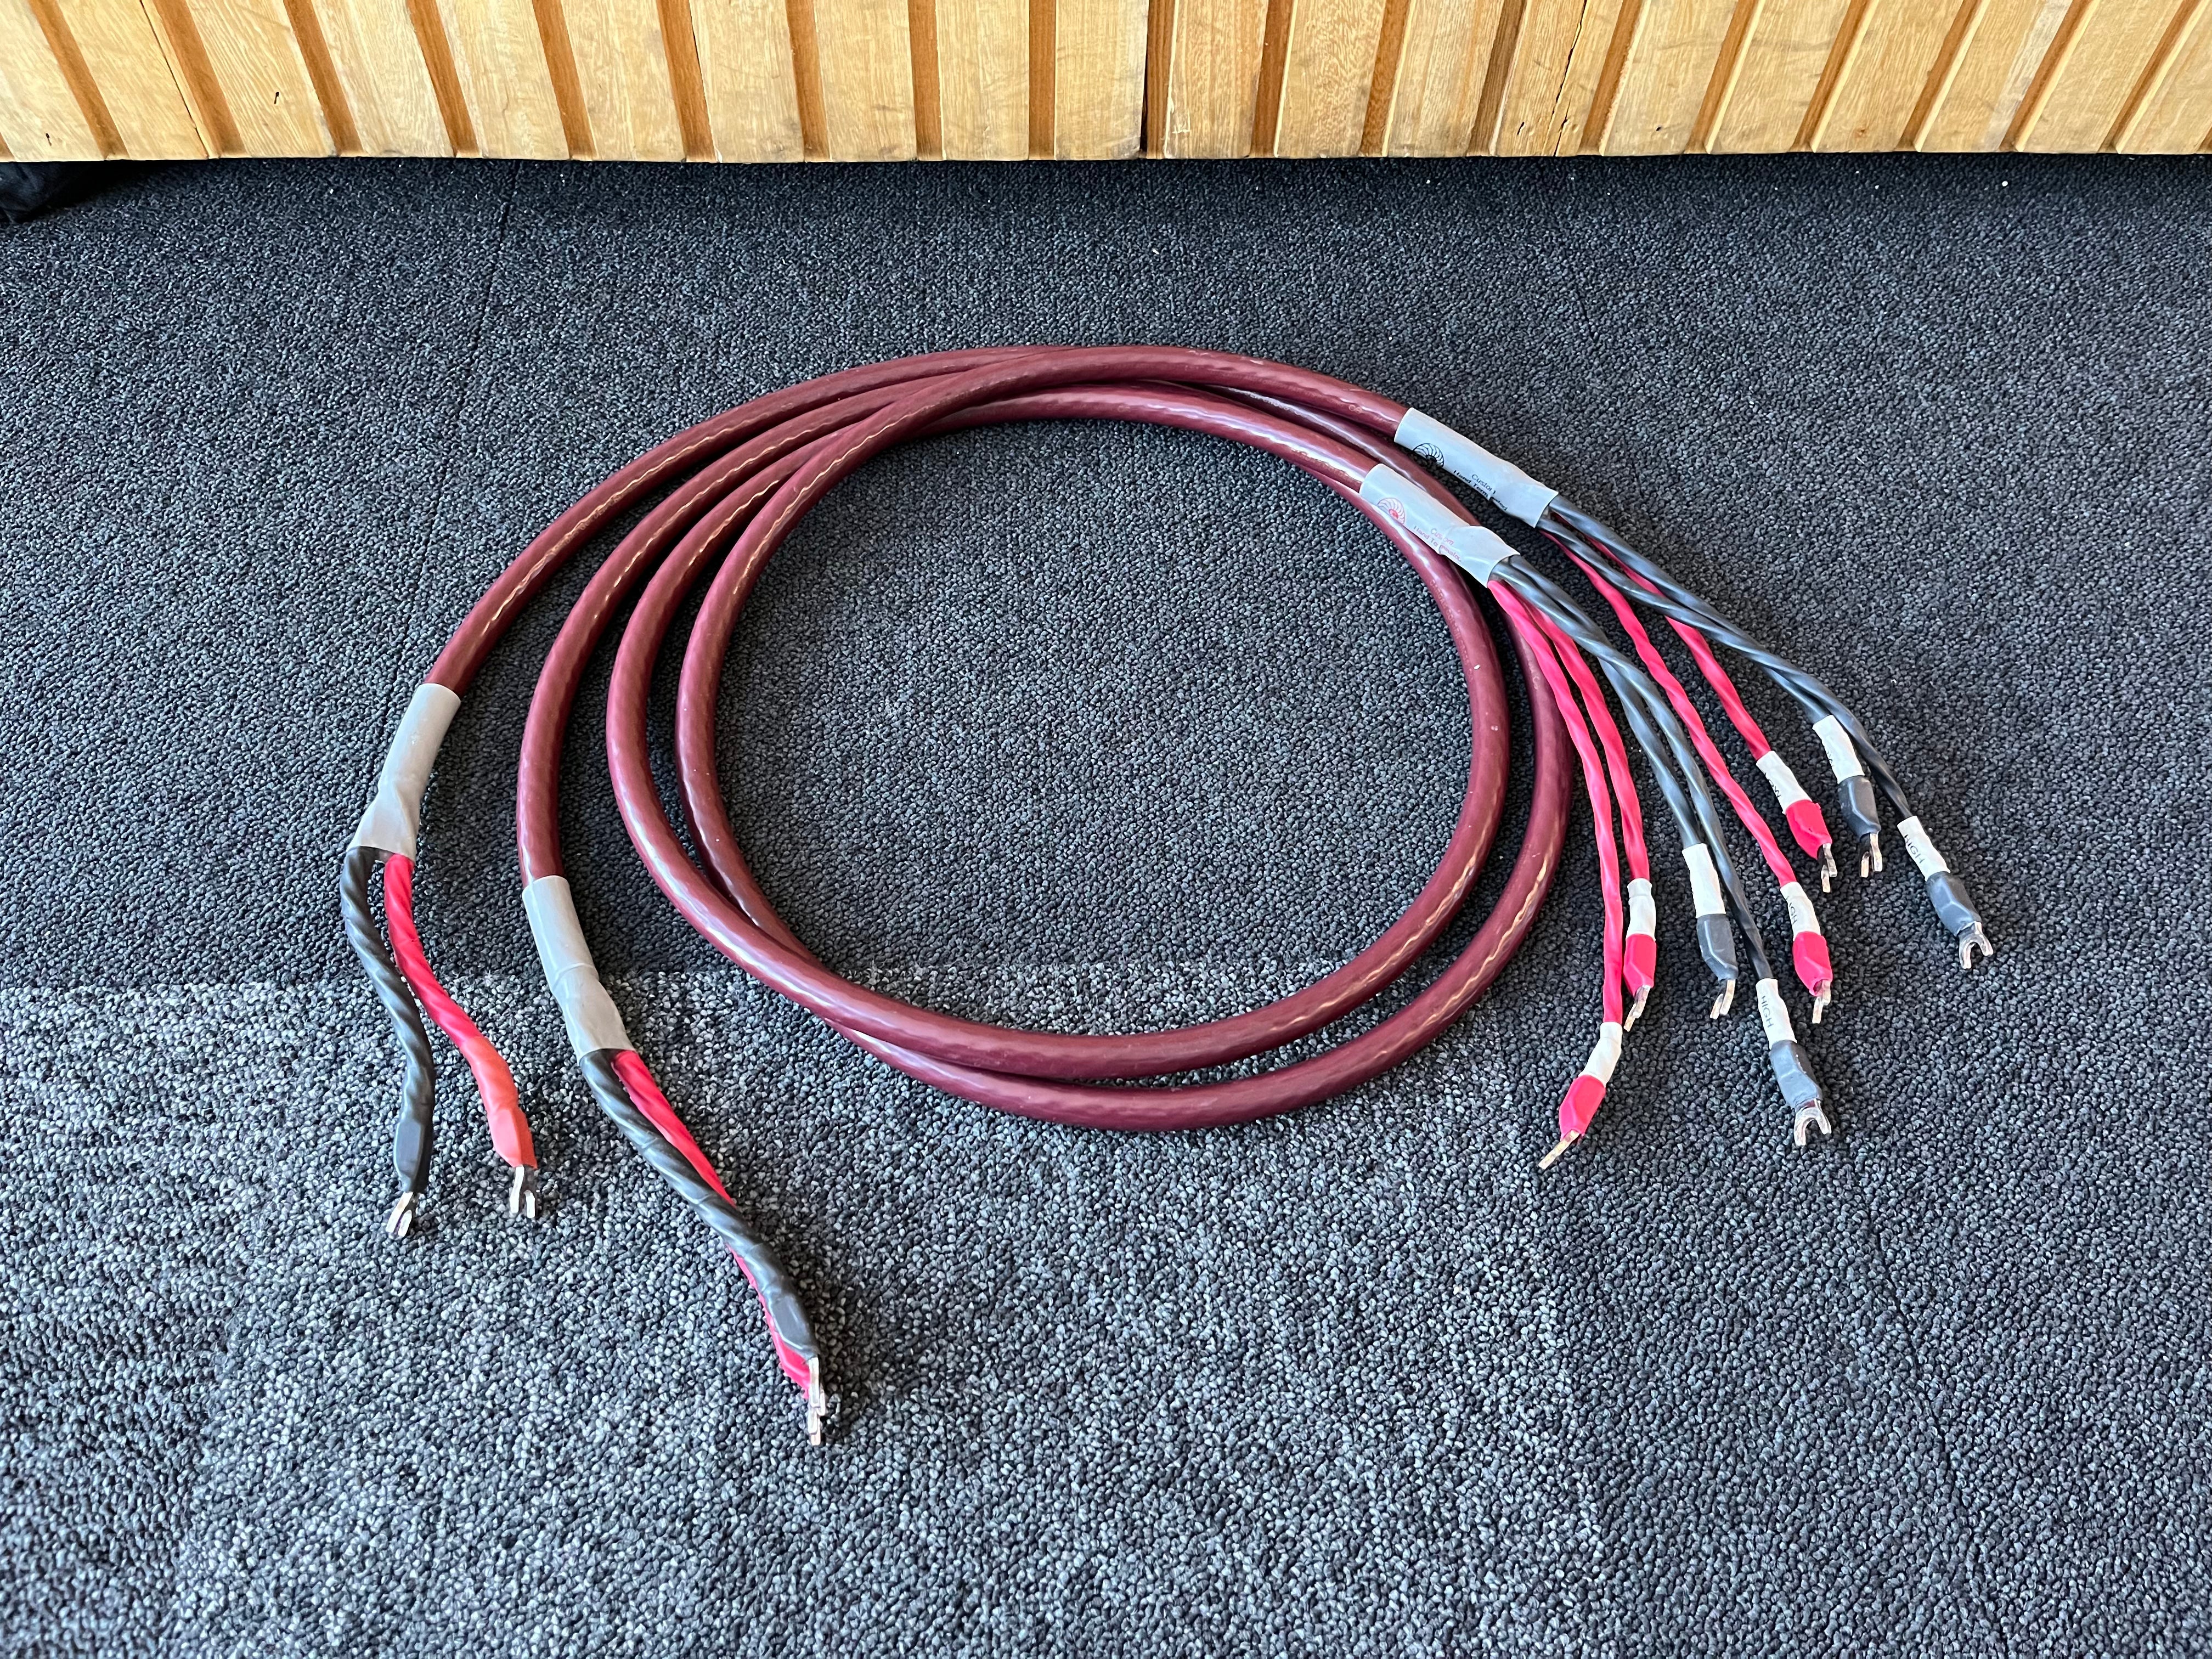 Cardas Golden Cross biwire 2m, replacement cables, location Oulu